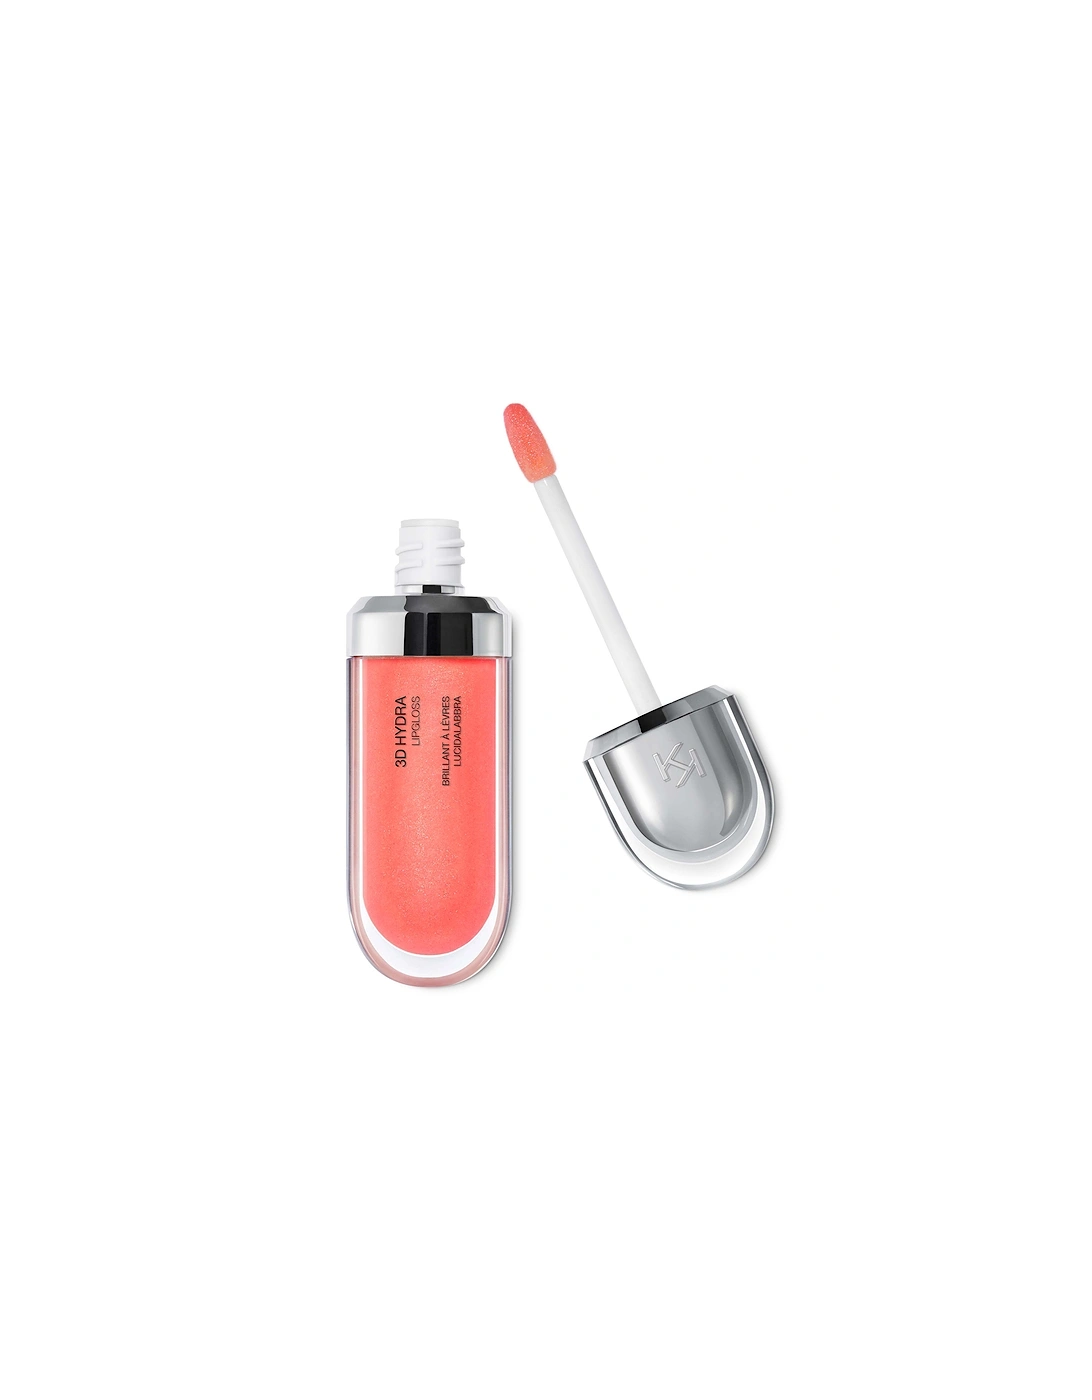 3D Hydra Lipgloss 6.5ml - 09 Soft Coral, 2 of 1